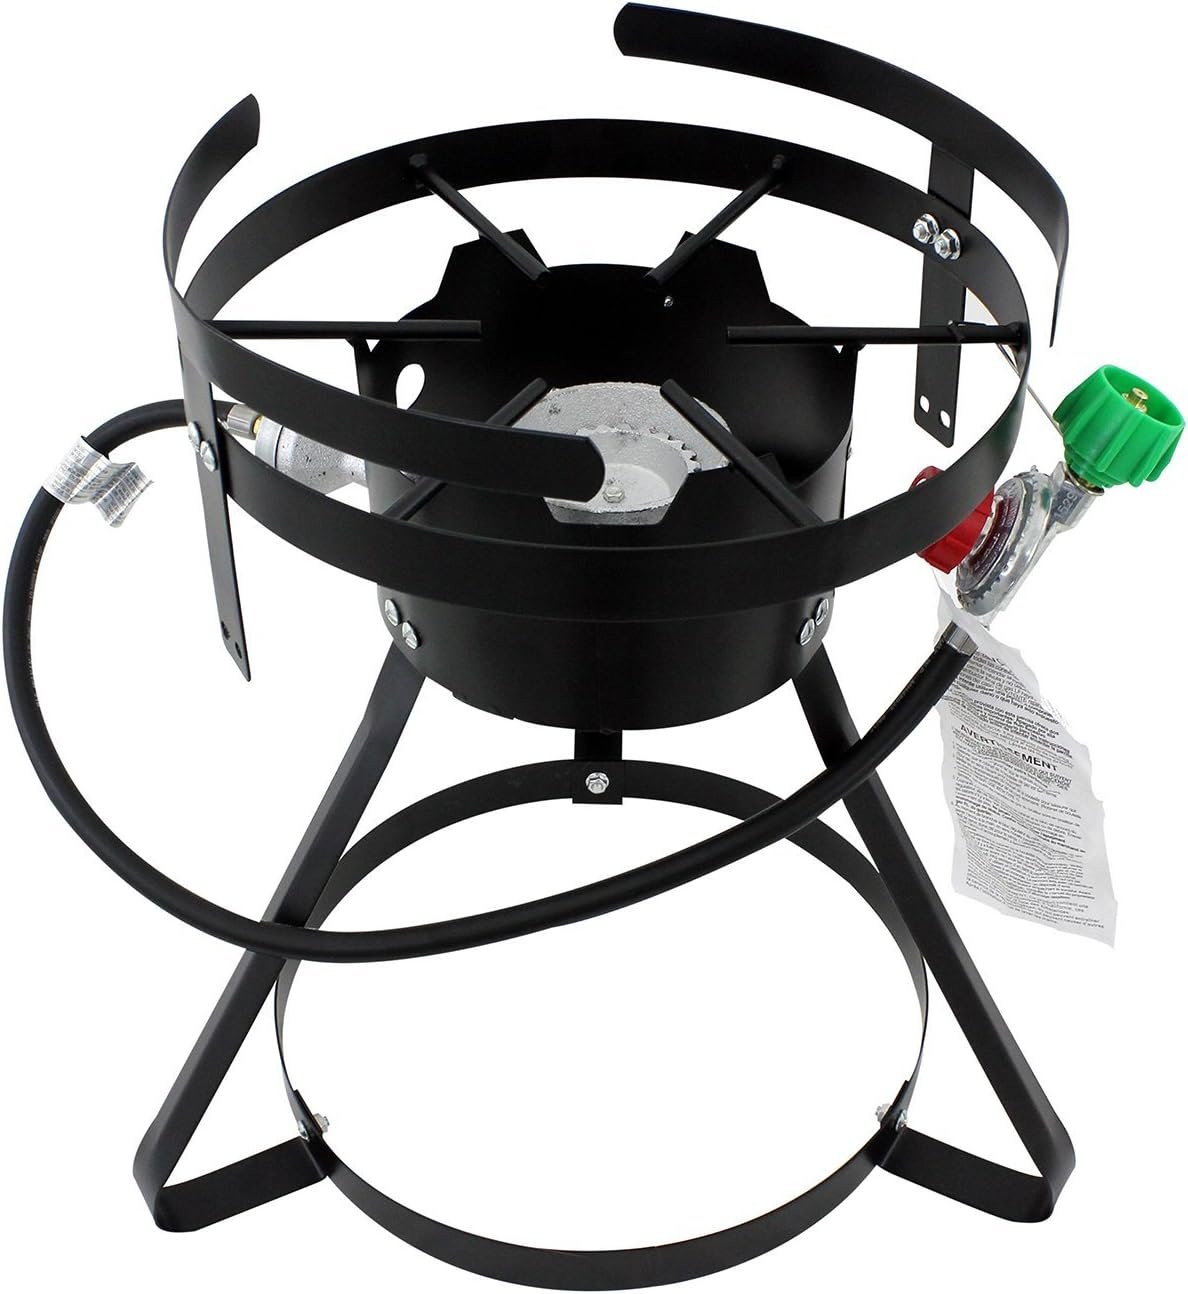 Chard Double Basket Outdoor Fish and Wing fryer, 18 quart, Black